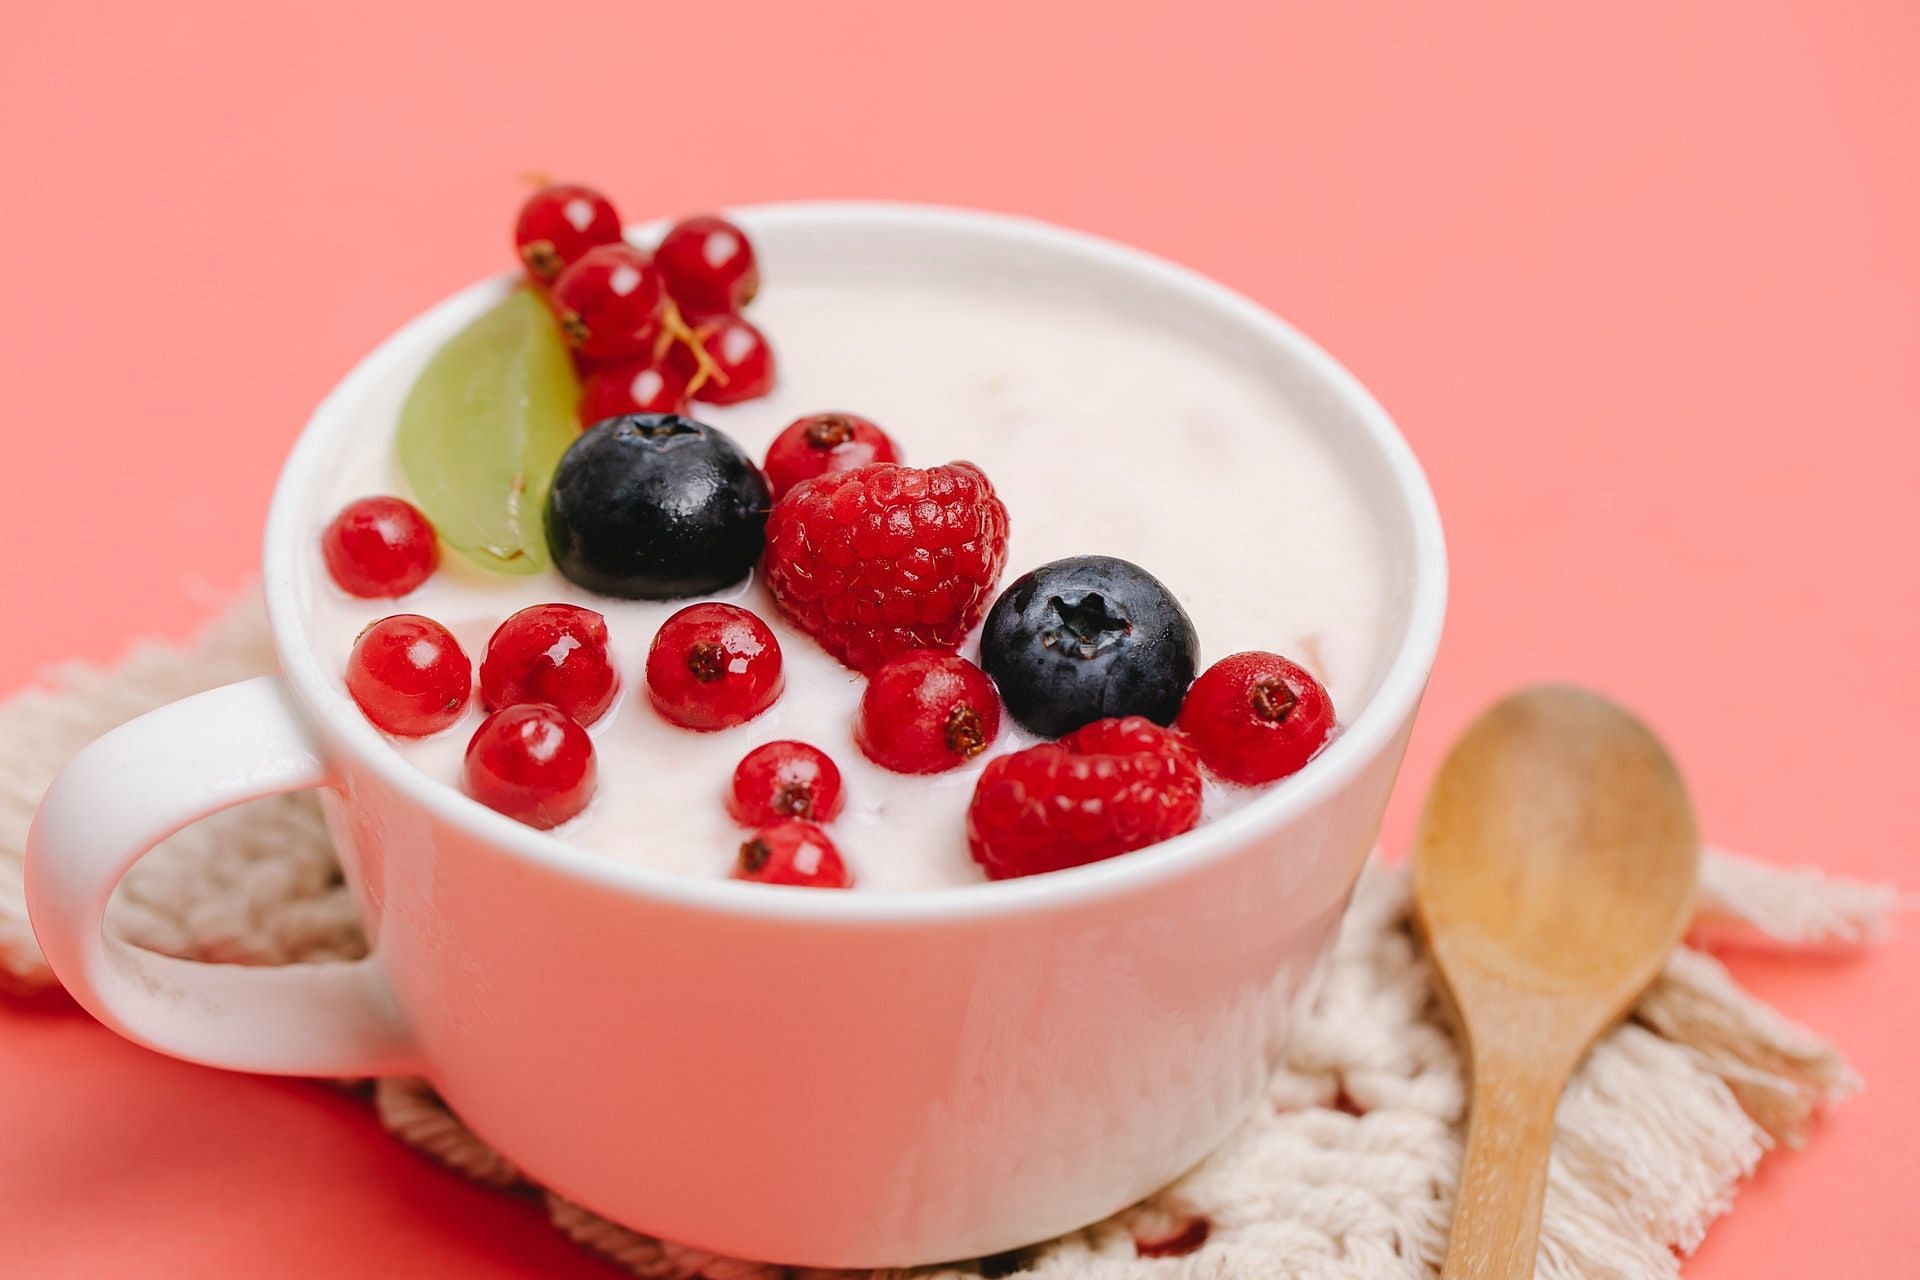 Yogurt is a healthy addition to desserts and shakes. (Photo by Any Lane via pexels)